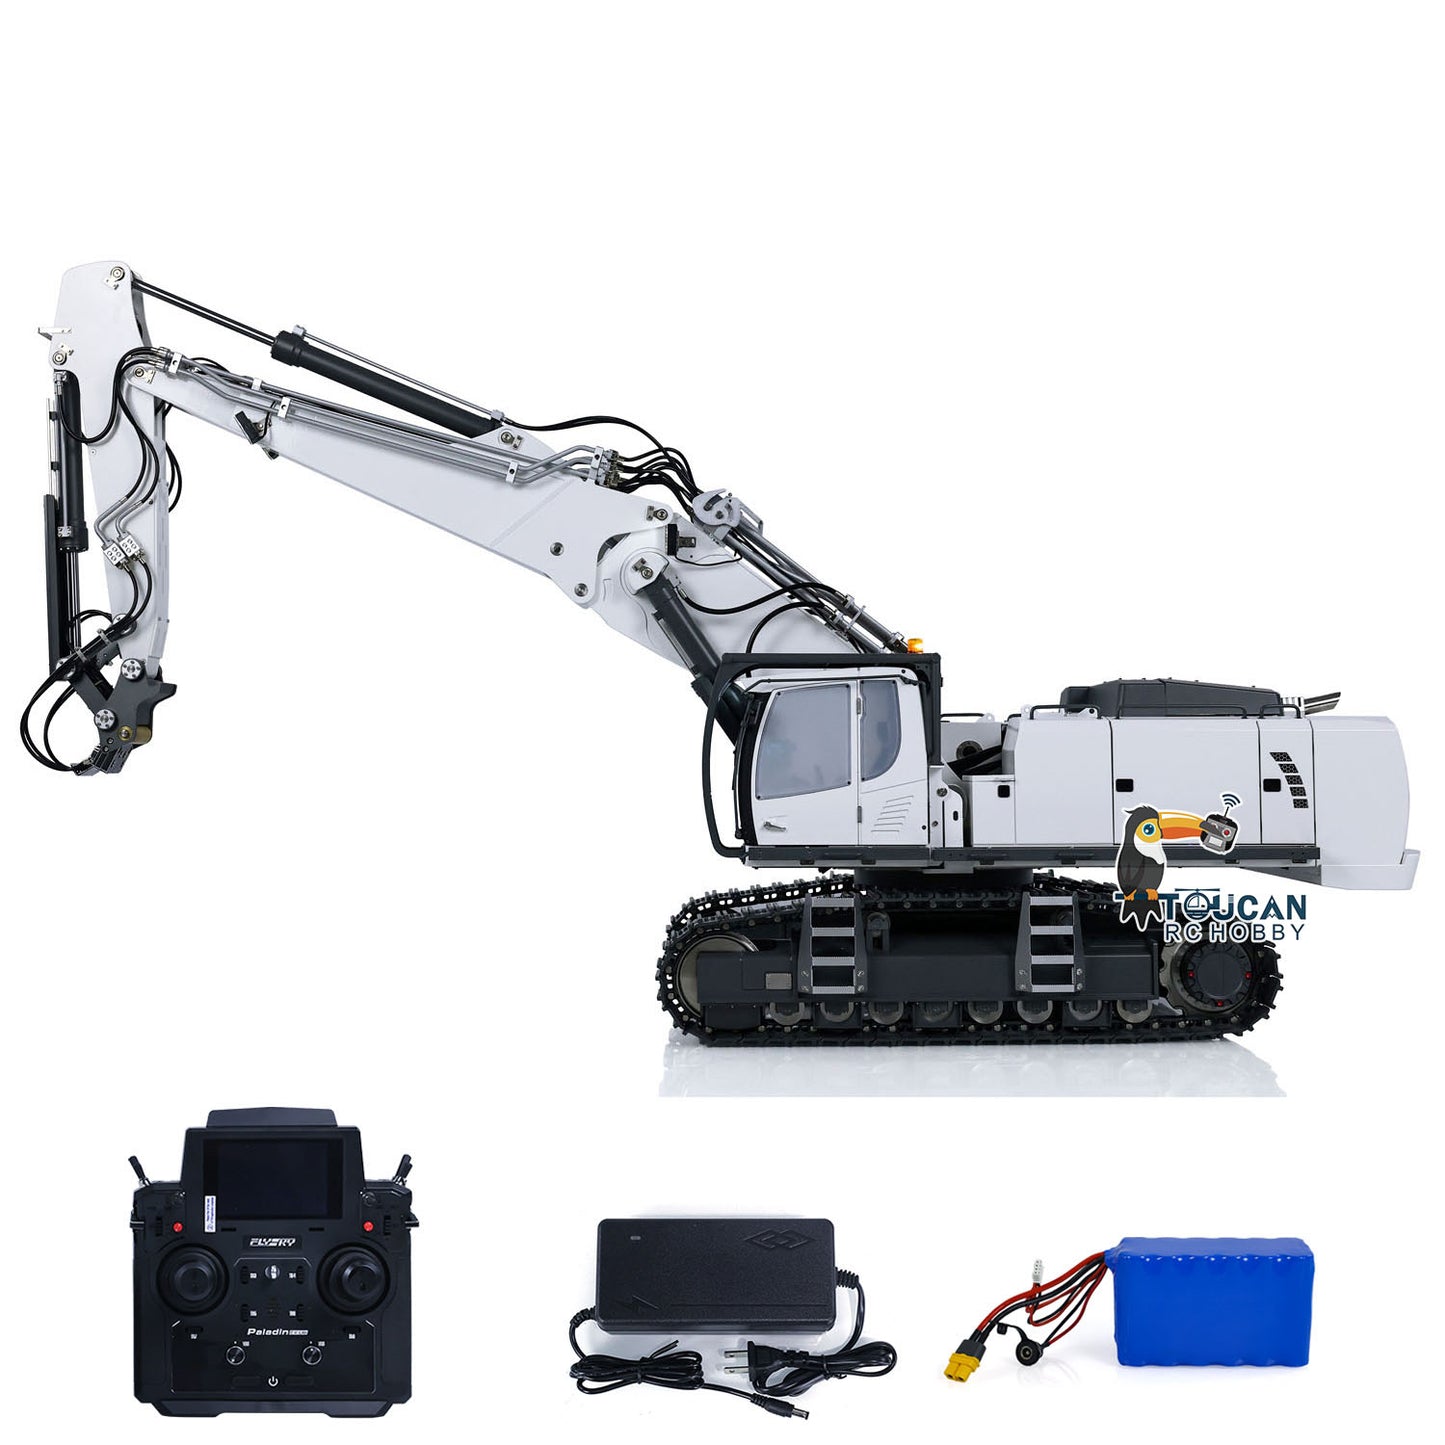 IN STOCK 1/14 CUT K970-301 RC Hydraulic Excavator PL18EV Lite Remote Control Digger Model Ready to Run Painted Assembled Cars